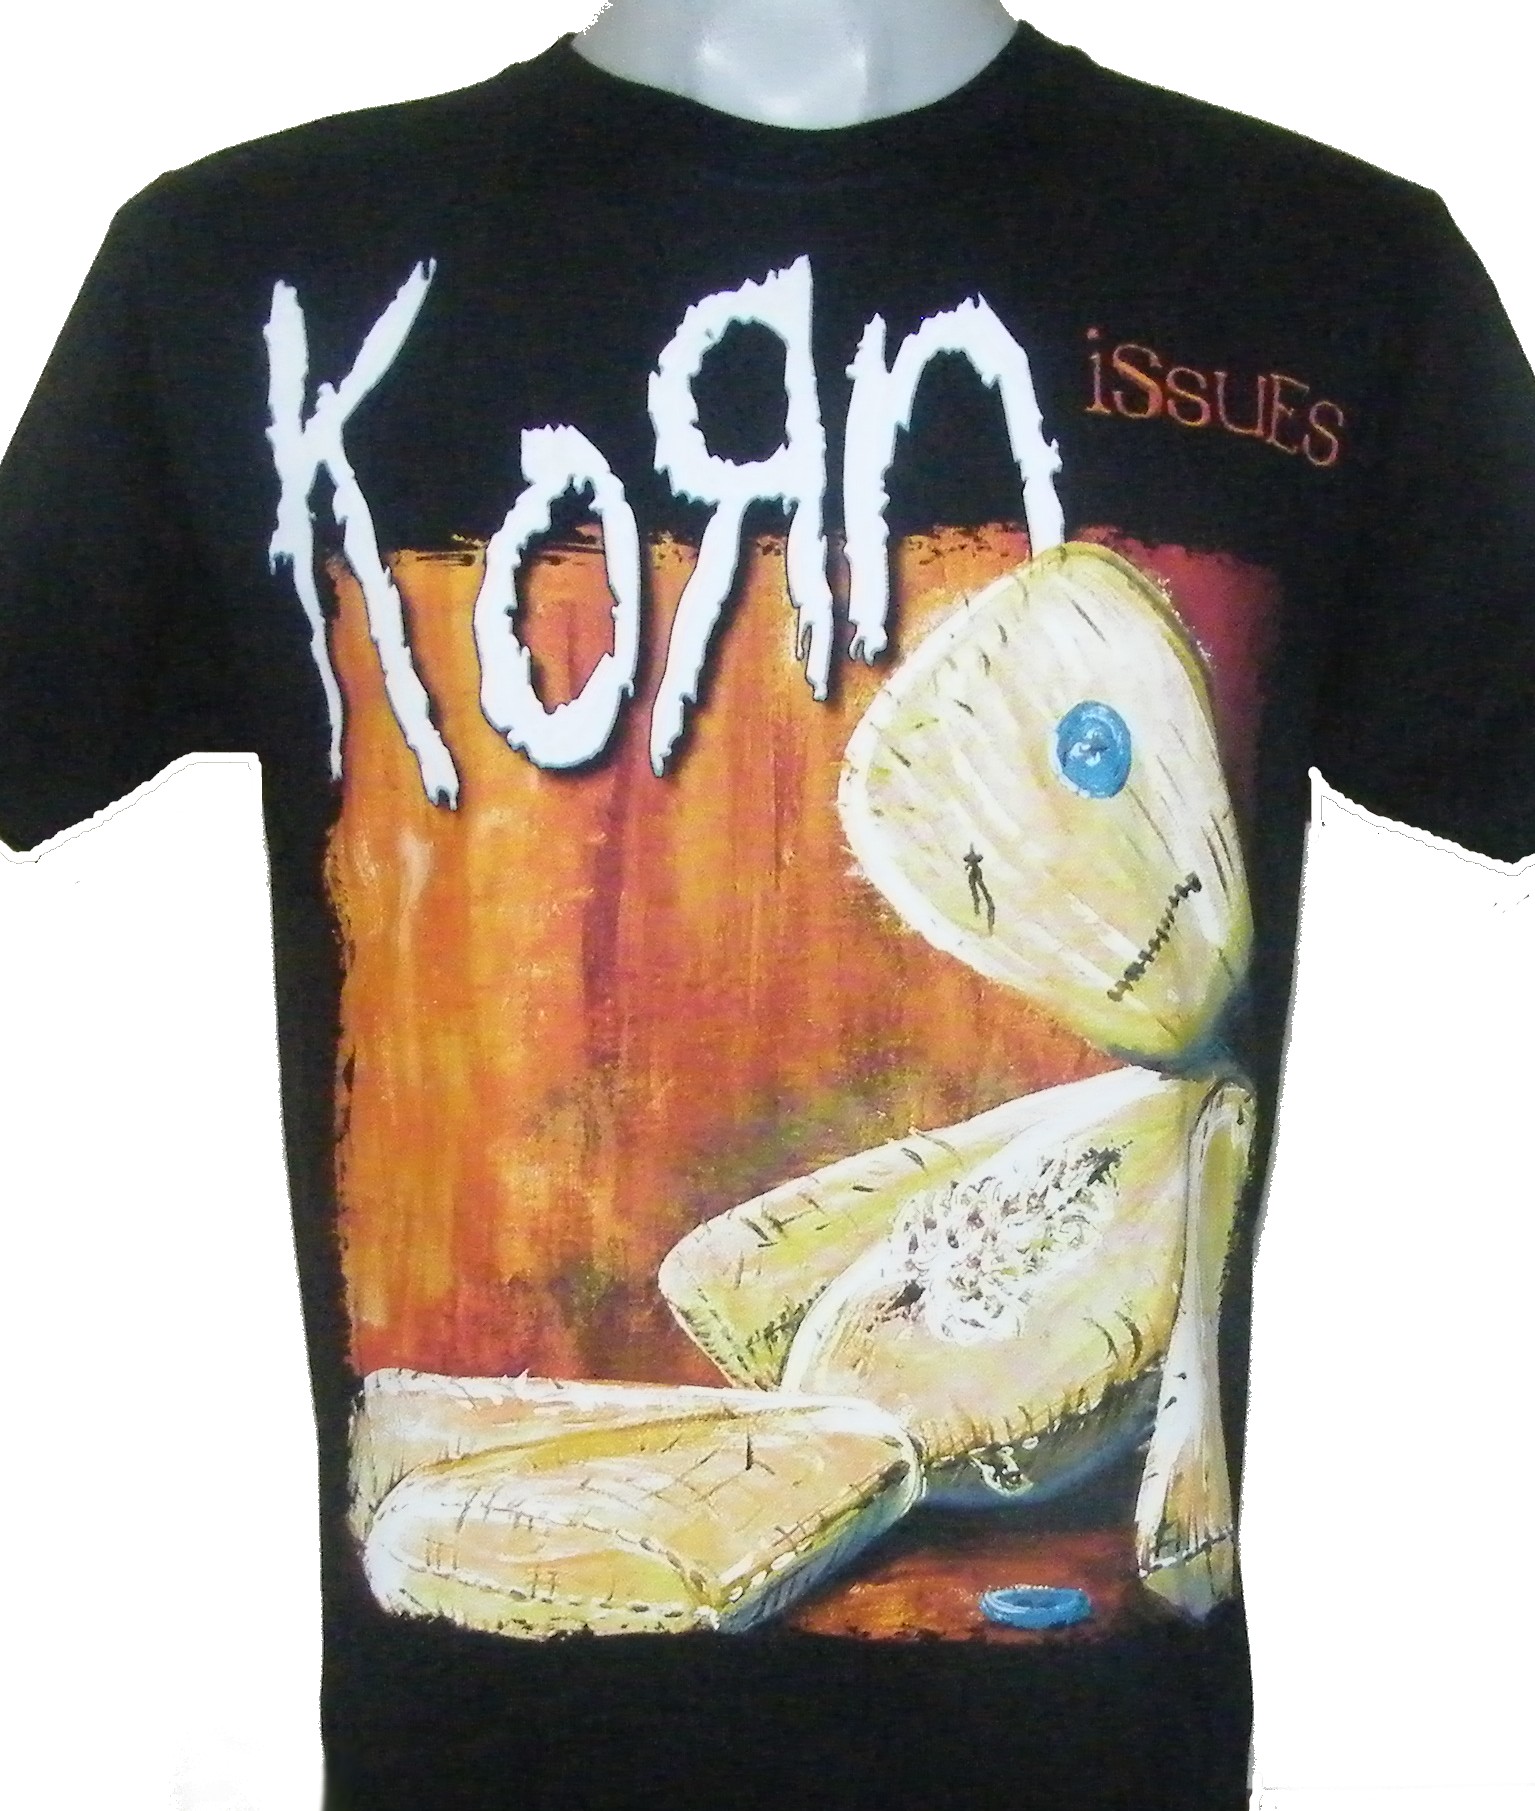 Korn t-shirt Issues size M